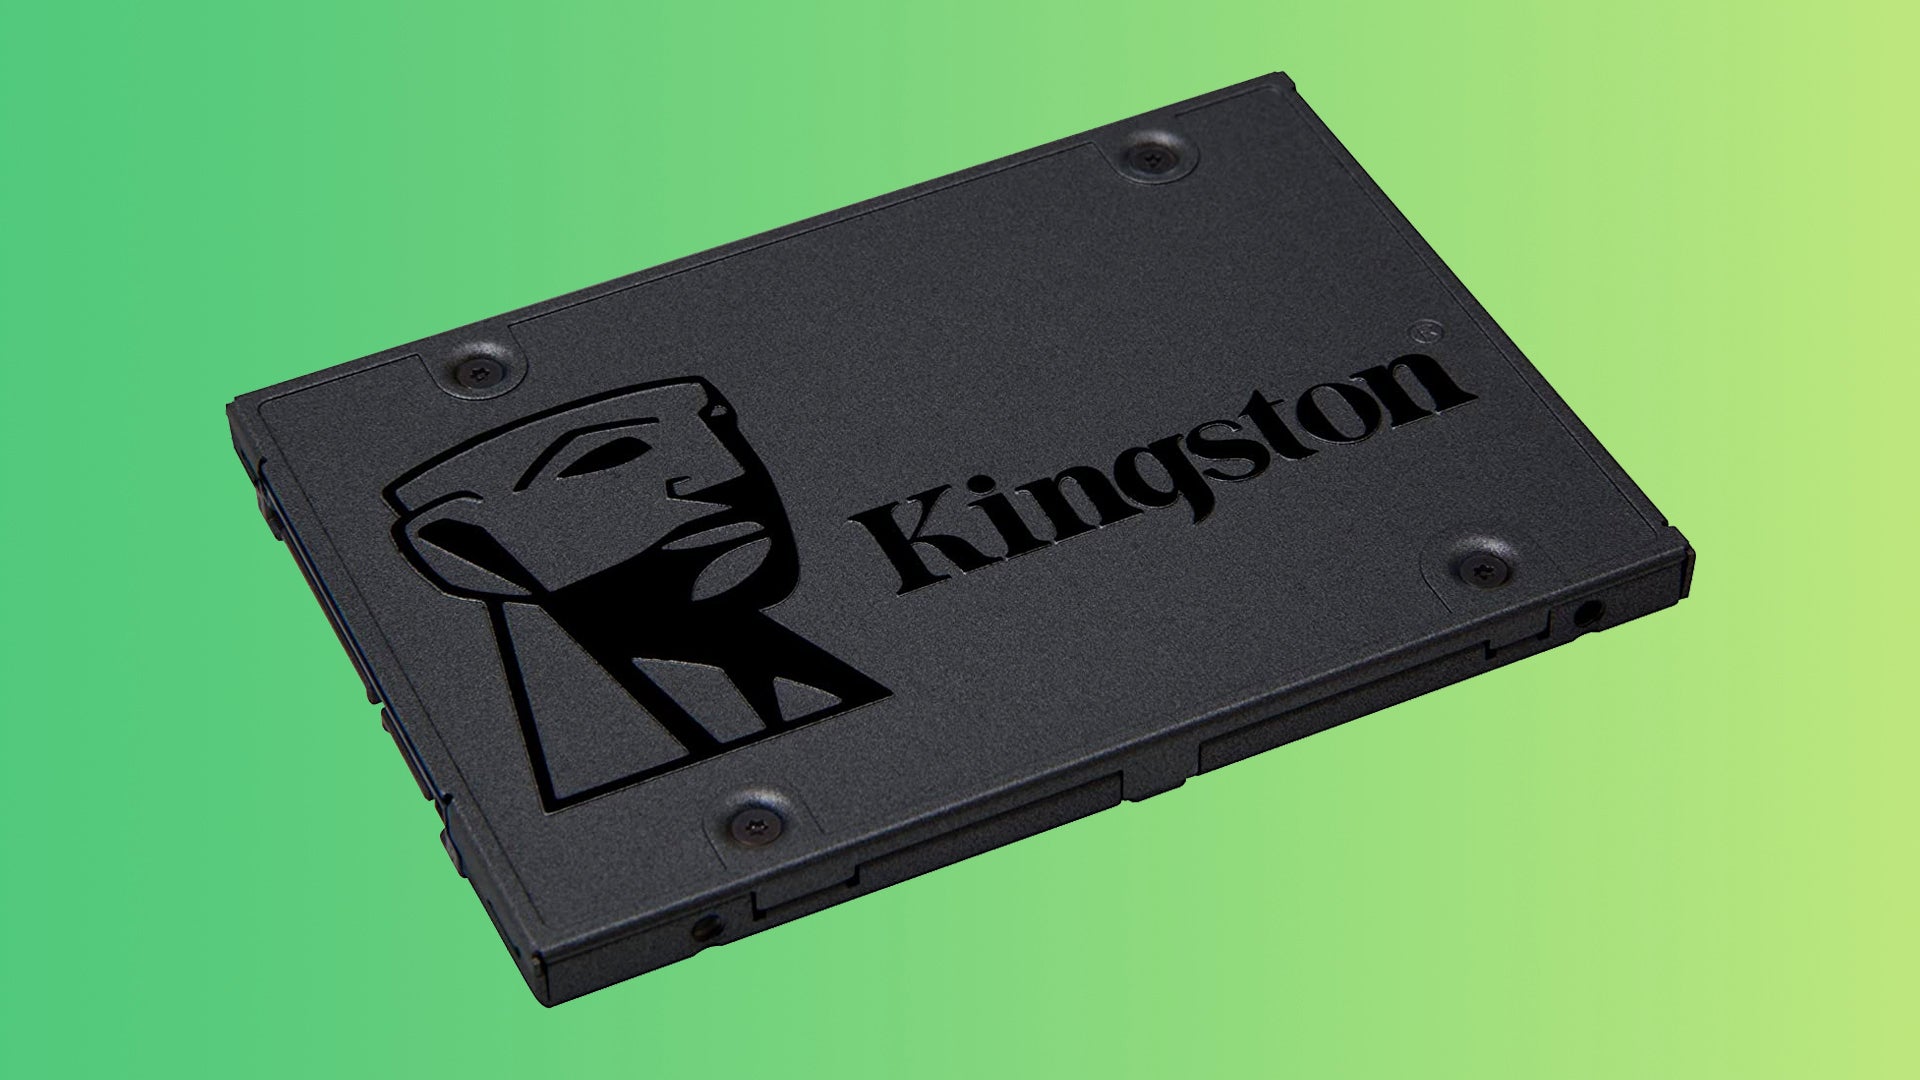 data hop Bake At £54, this discounted Kingston A400 is the cheapest 1TB SSD on Amazon |  Eurogamer.net